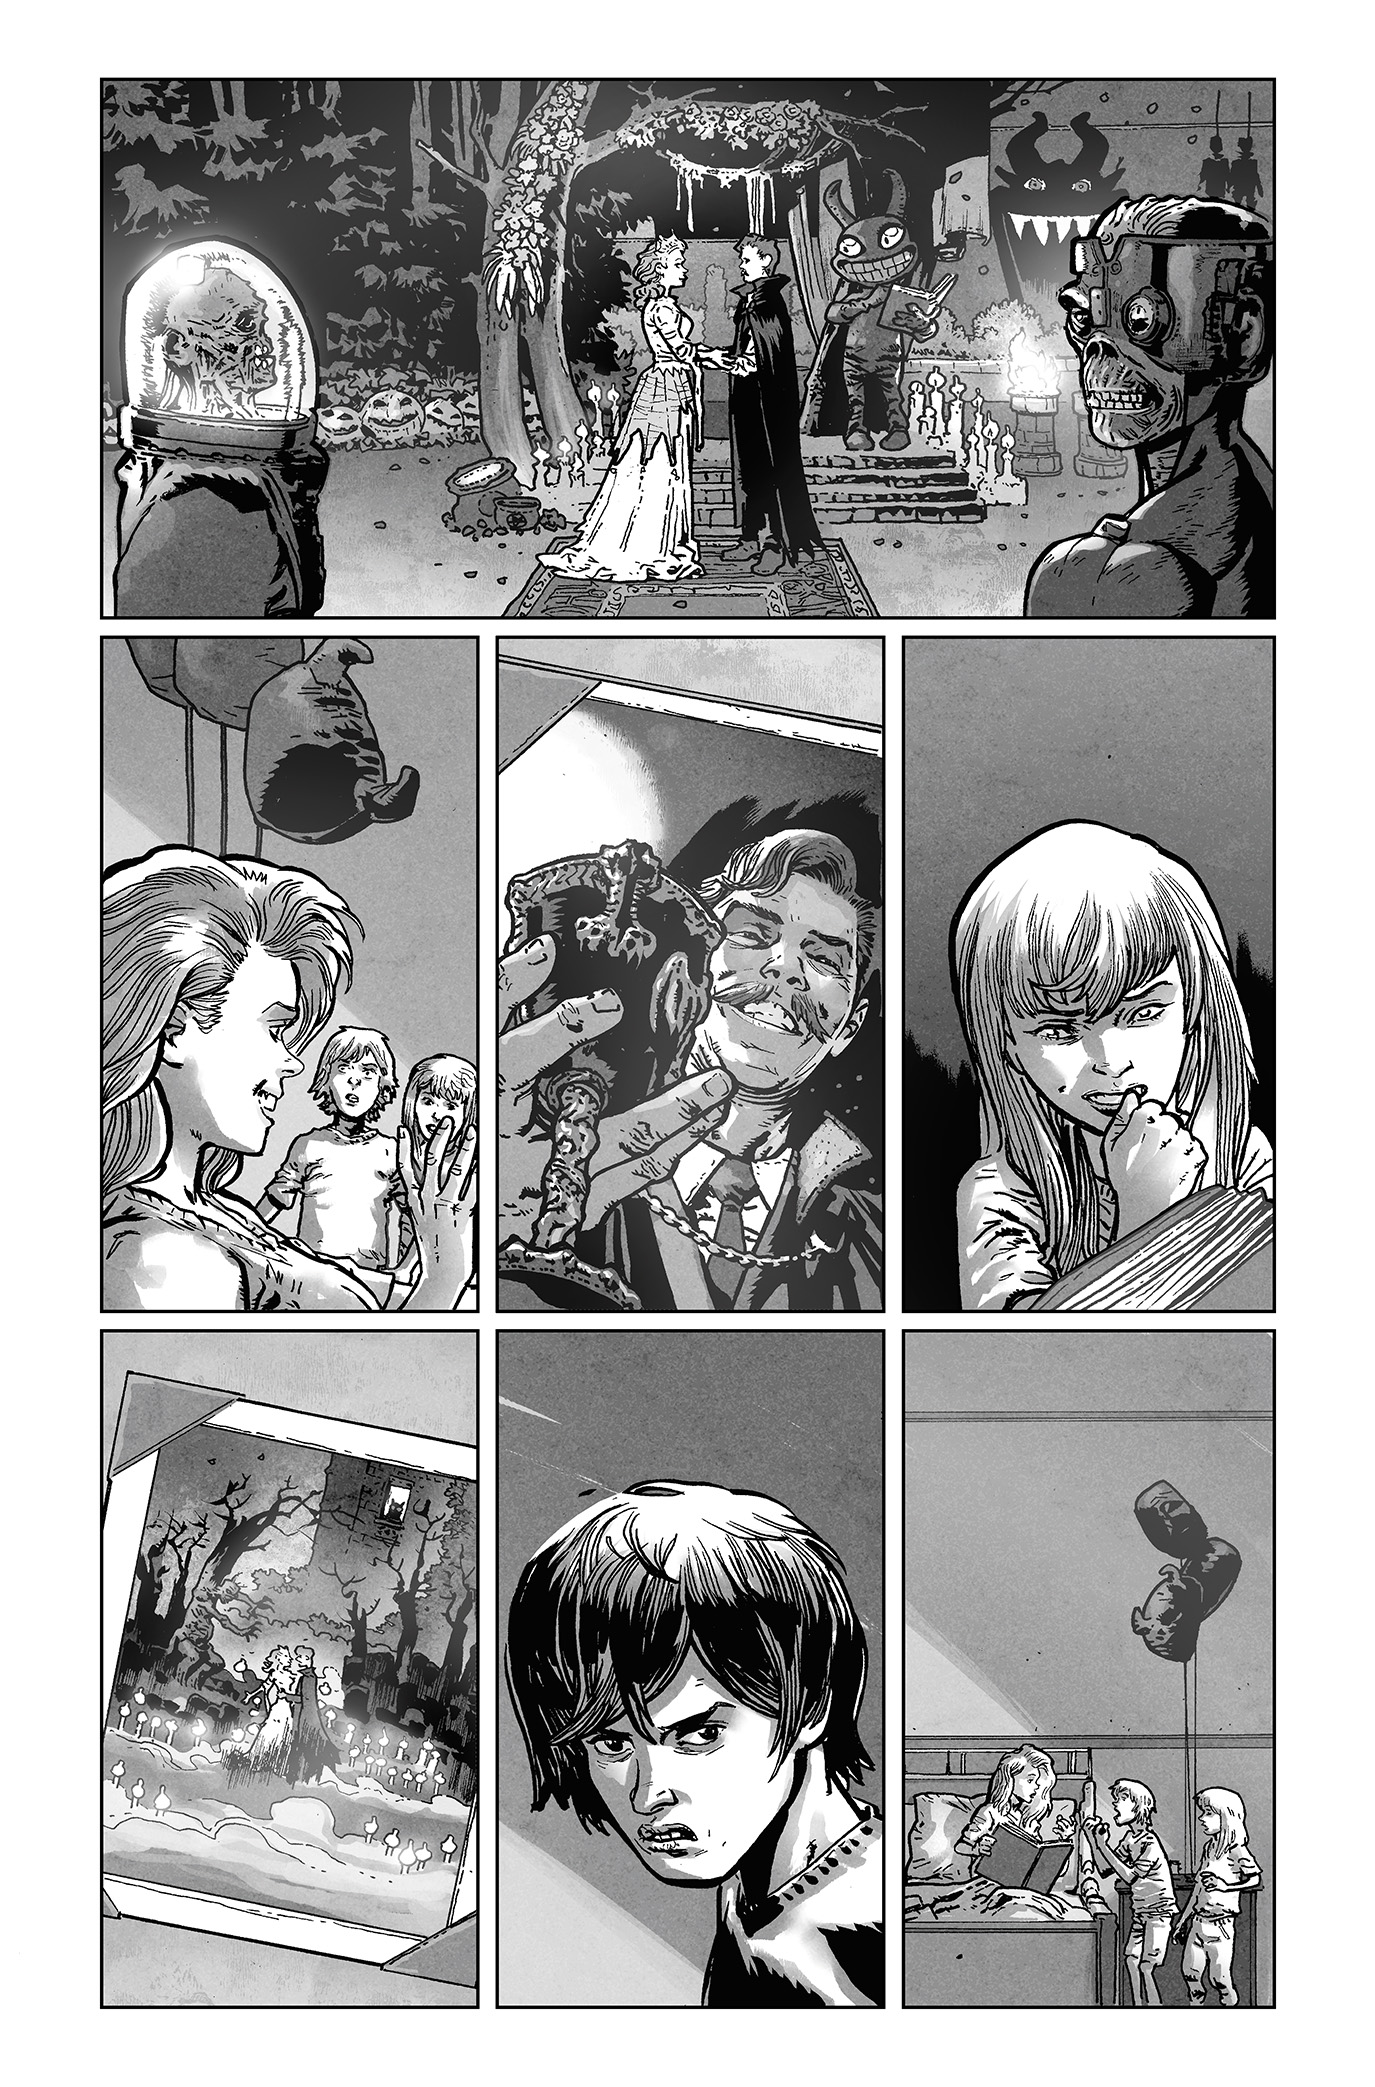 Pages from Dark Ride #7